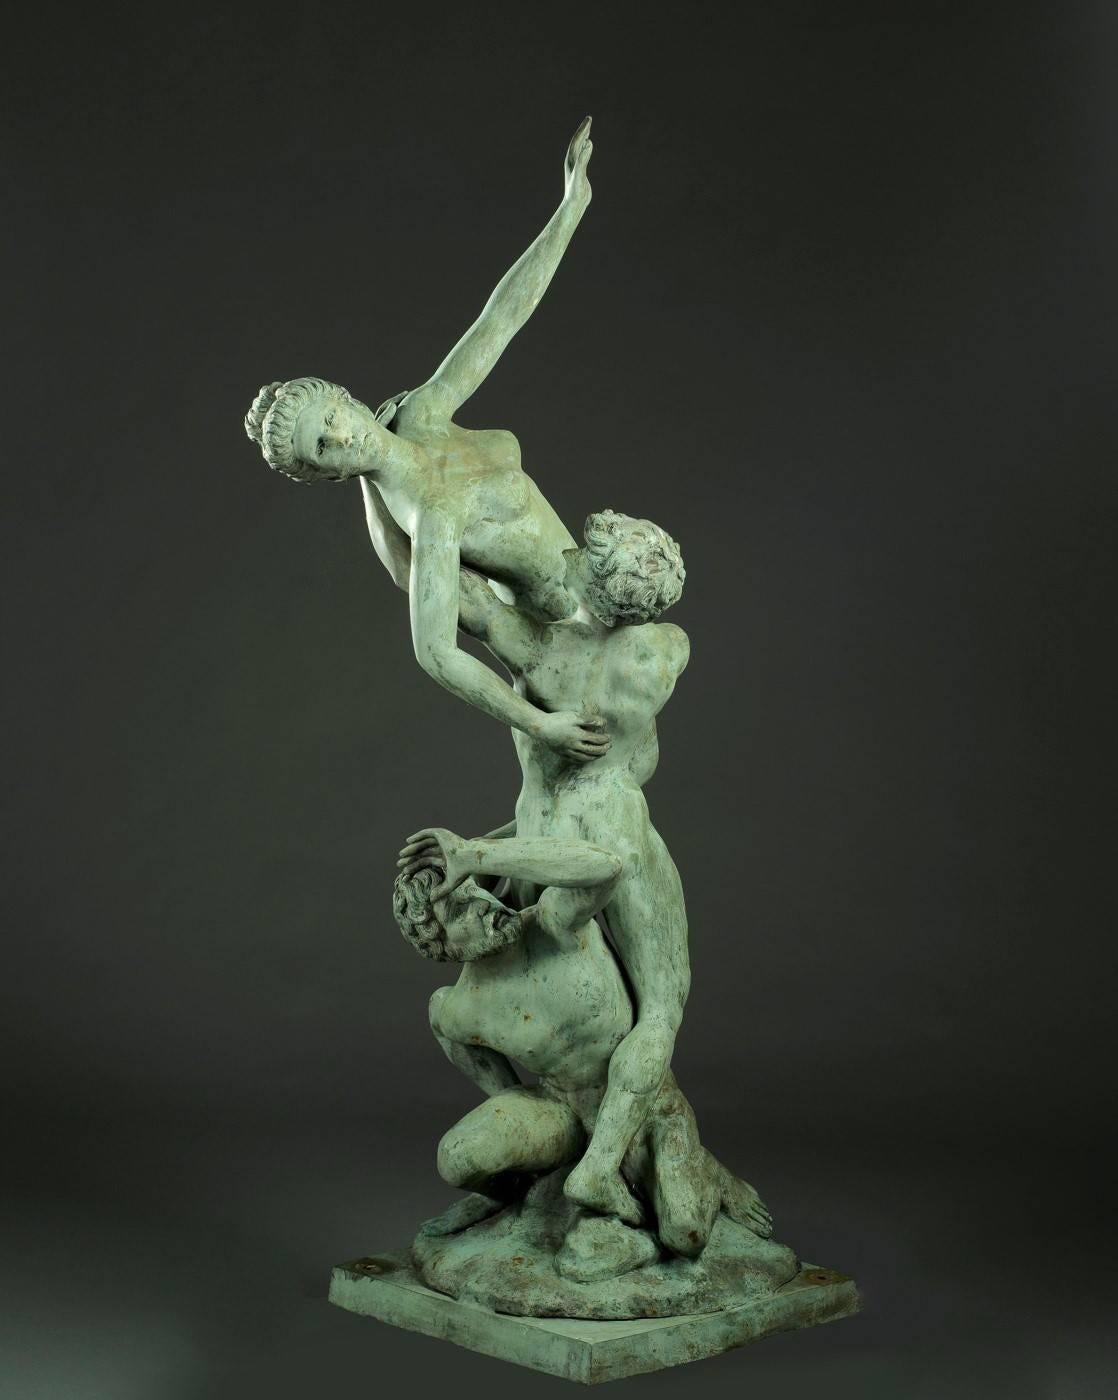 Very large Italian garden sculpture, patinated bronze with three figures.
Late 19th century, after 